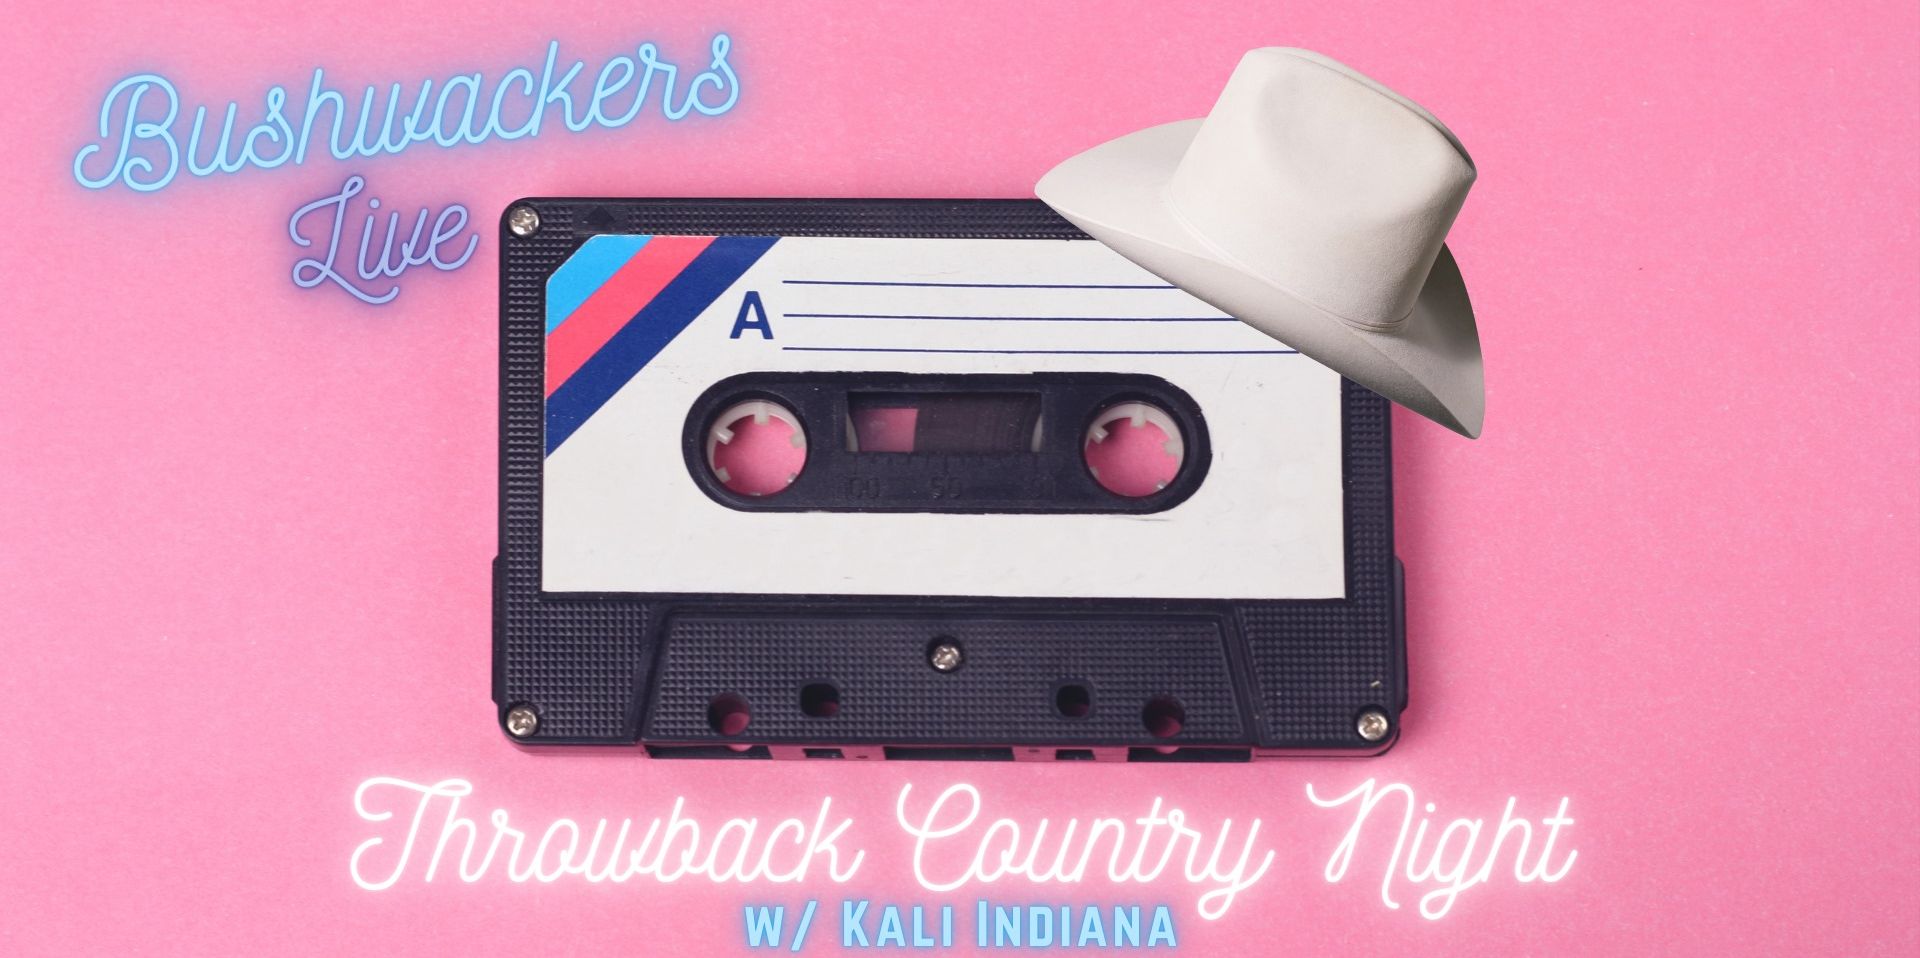 Throwback Country Night w/ Kali Indiana promotional image